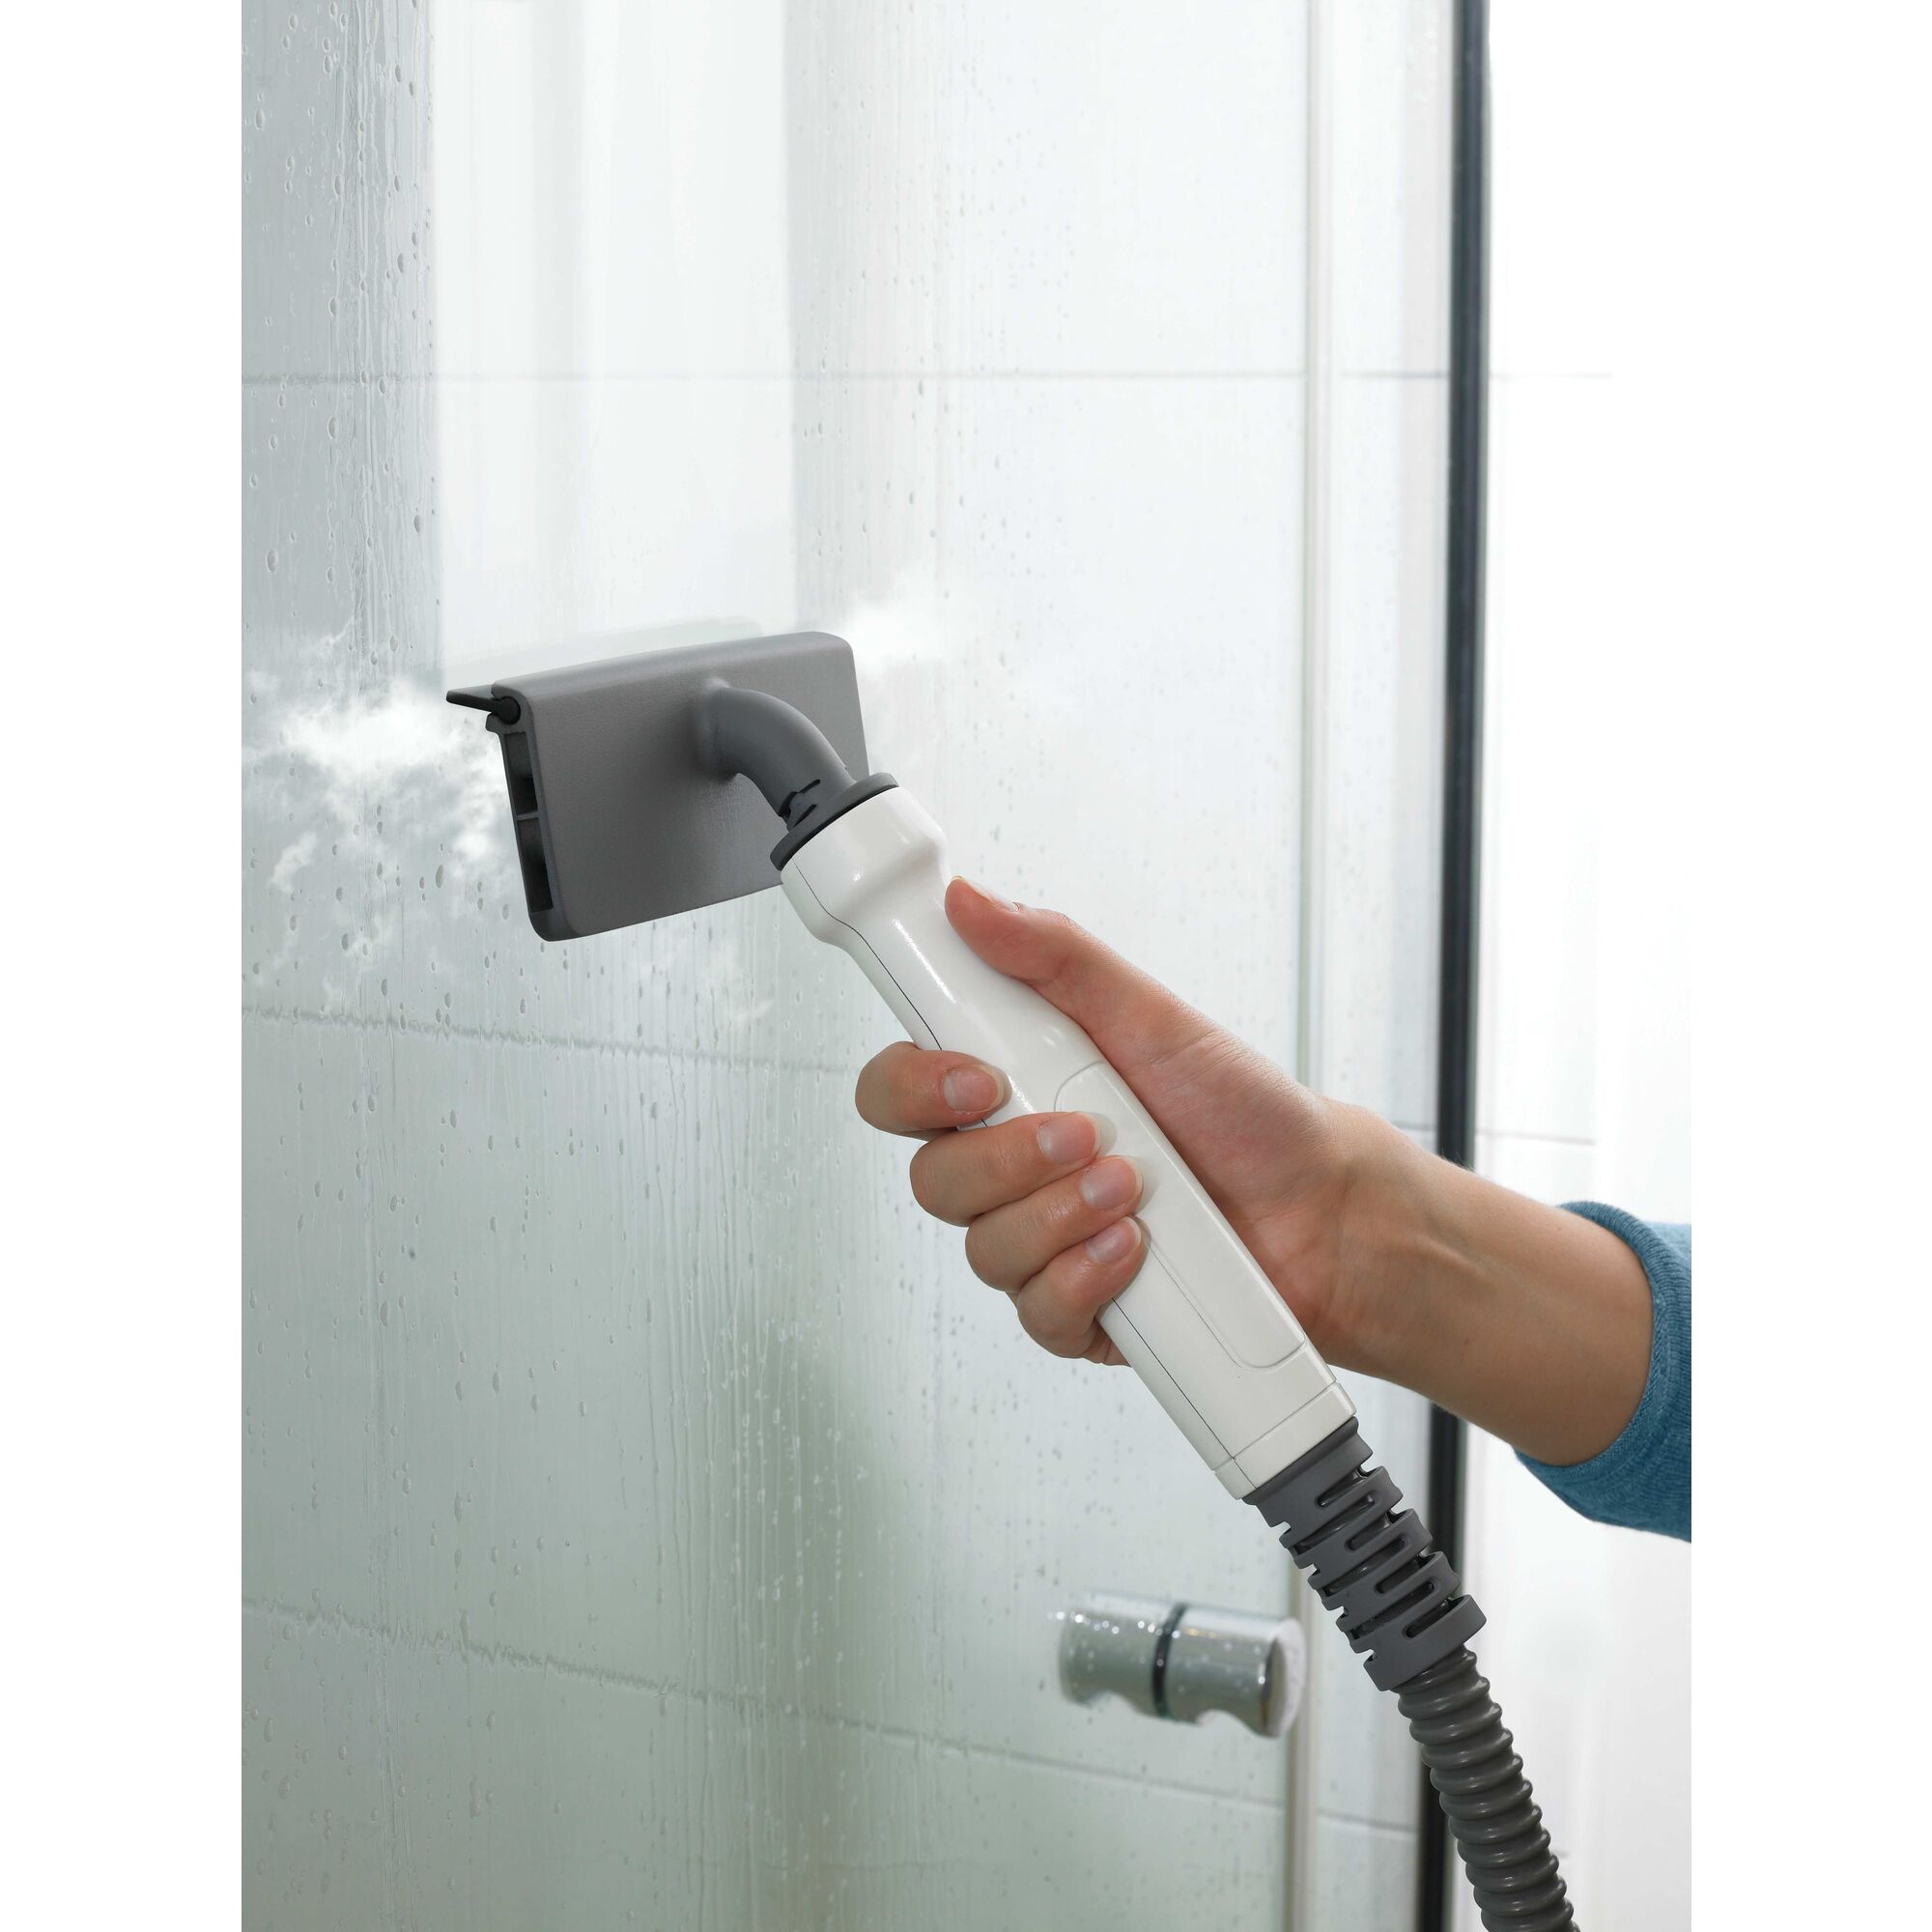 7 in 1 Steam Mop with Steam Glove Handheld Steamer being used for cleaning shower glass wall.